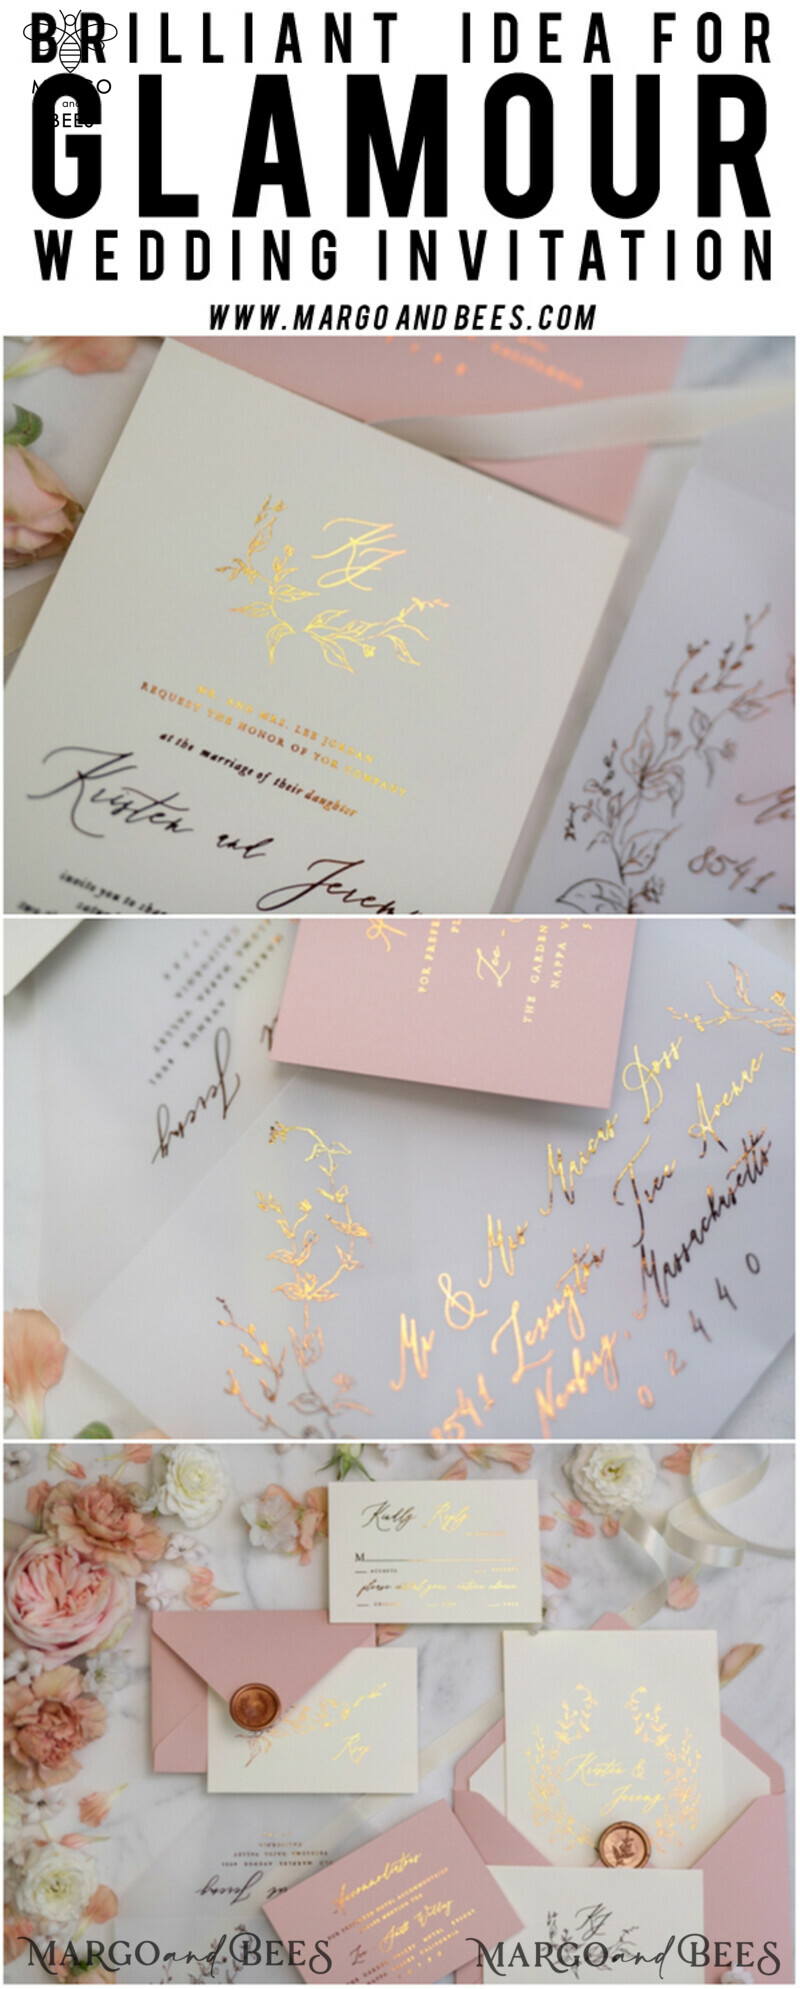 Bespoke Vellum Wedding Invitation Suite: Romantic Blush Pink and Glamour Gold Foil with Elegant Golden Touch-39